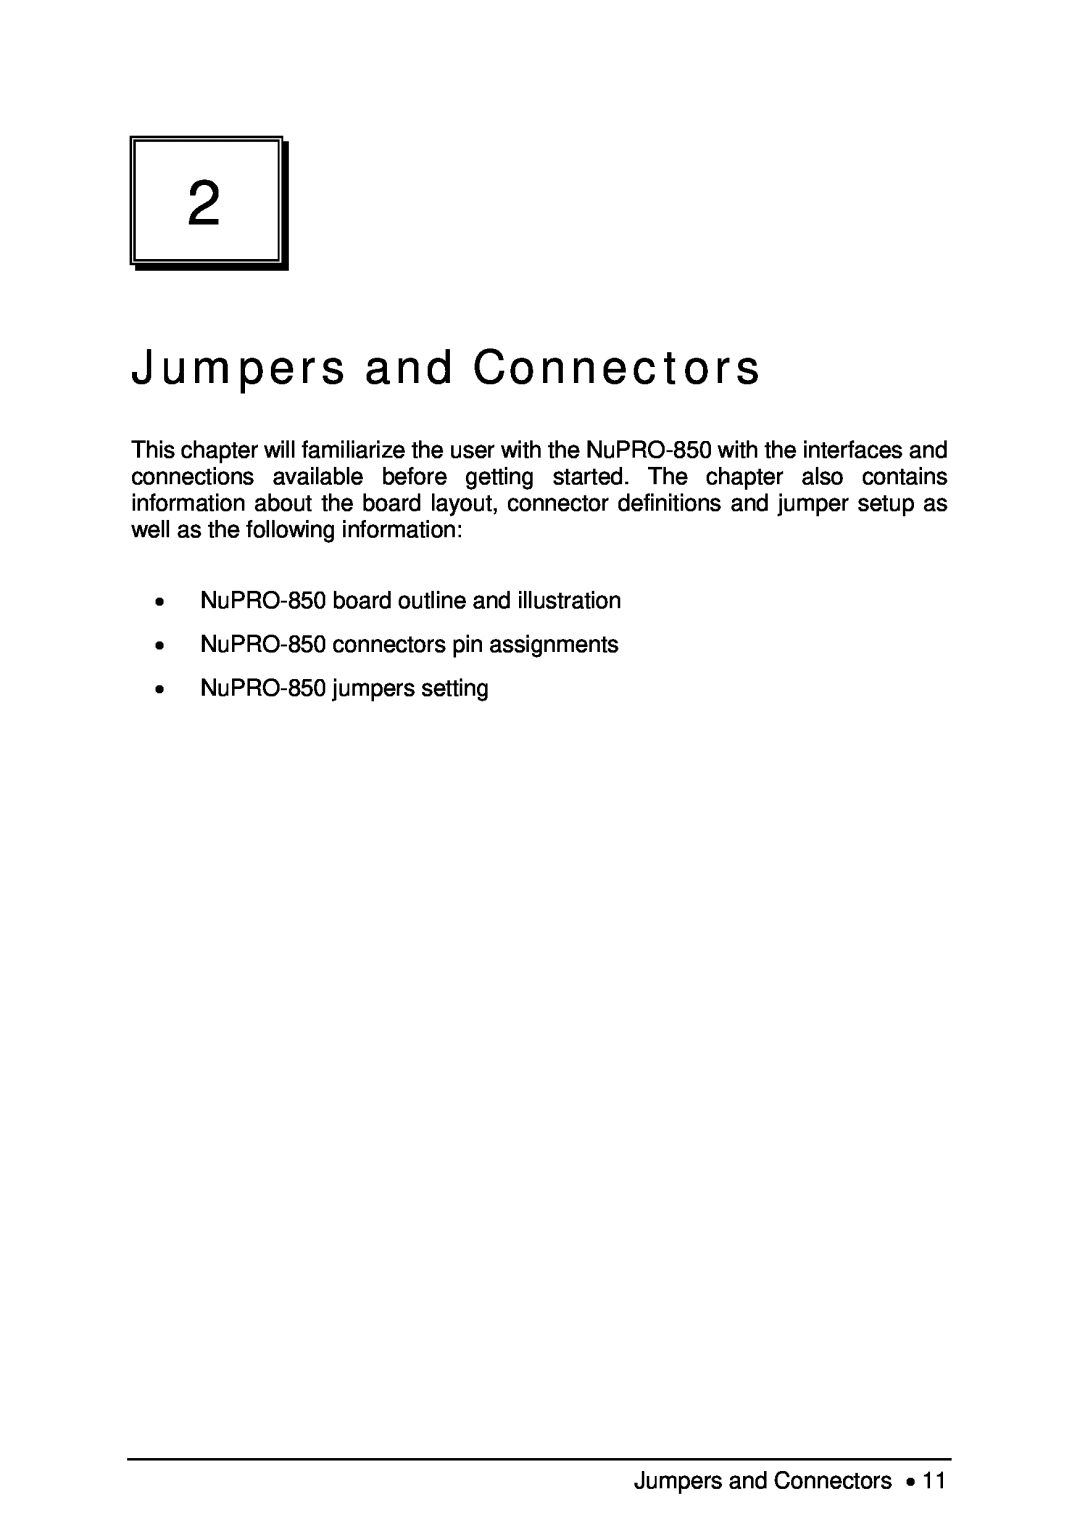 Intel NuPRO-850 user manual Jumpers and Connectors 